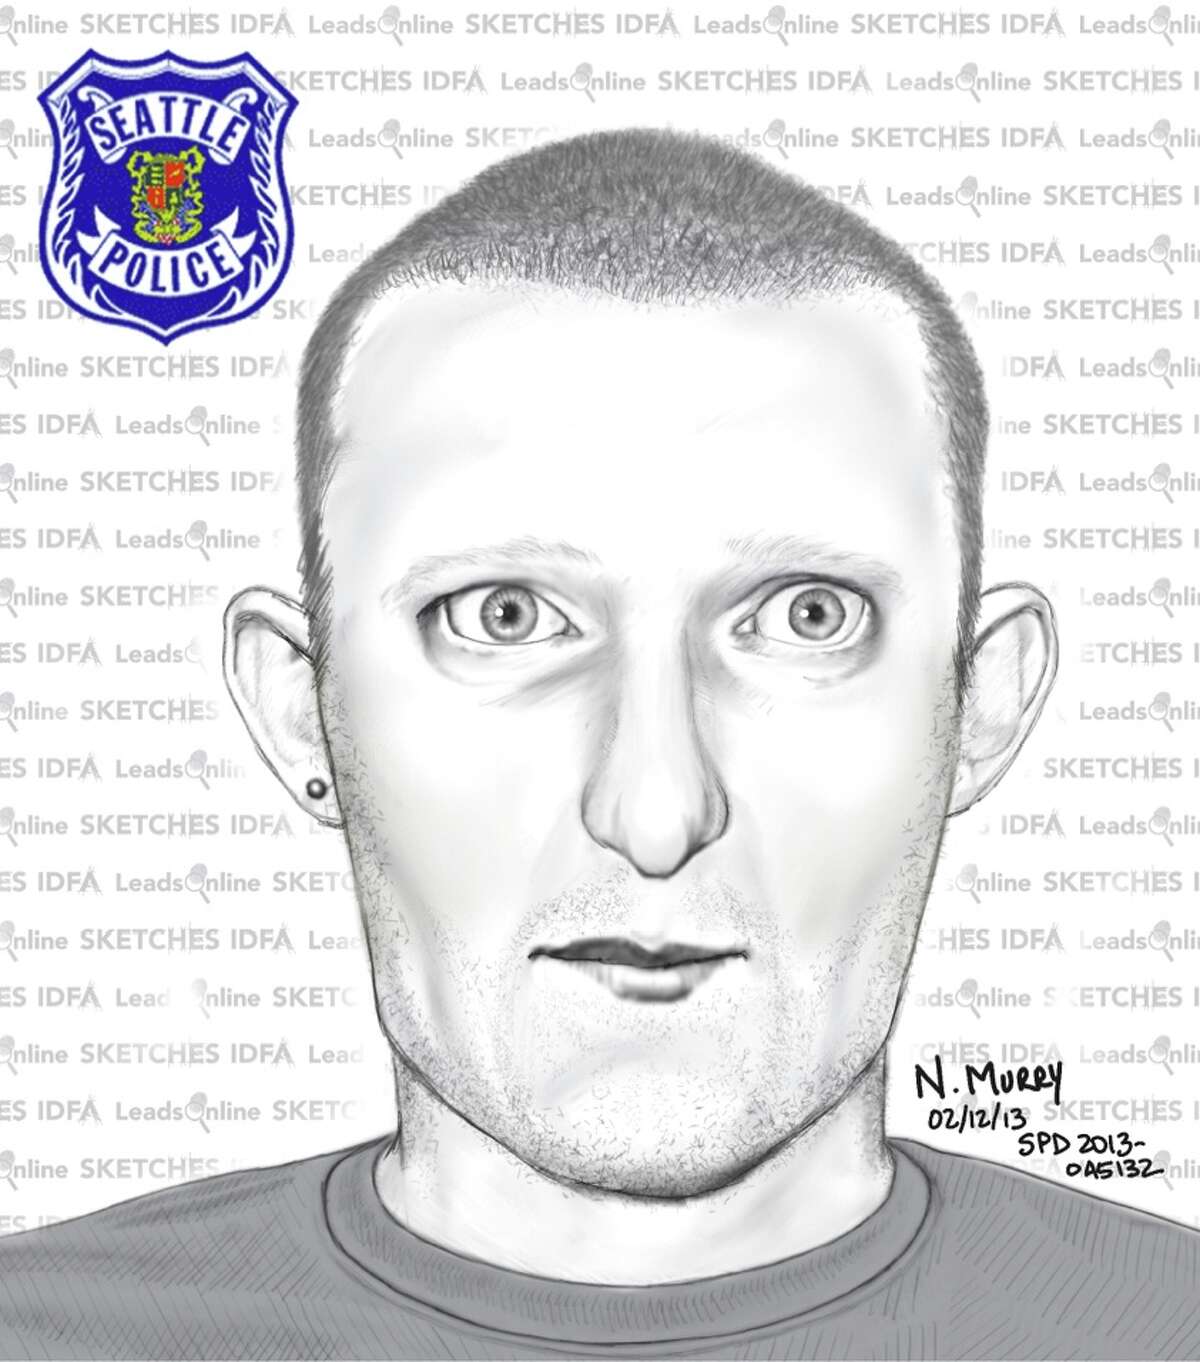 Seattle Police released this sketch Tuesday of the man suspected of sexually assaulted a woman walking home from Northgate Mall the night of Feb. 8. Police say they have not linked all four recent sexual assault cases in North Seattle. Anyone with information is asked to call 911.